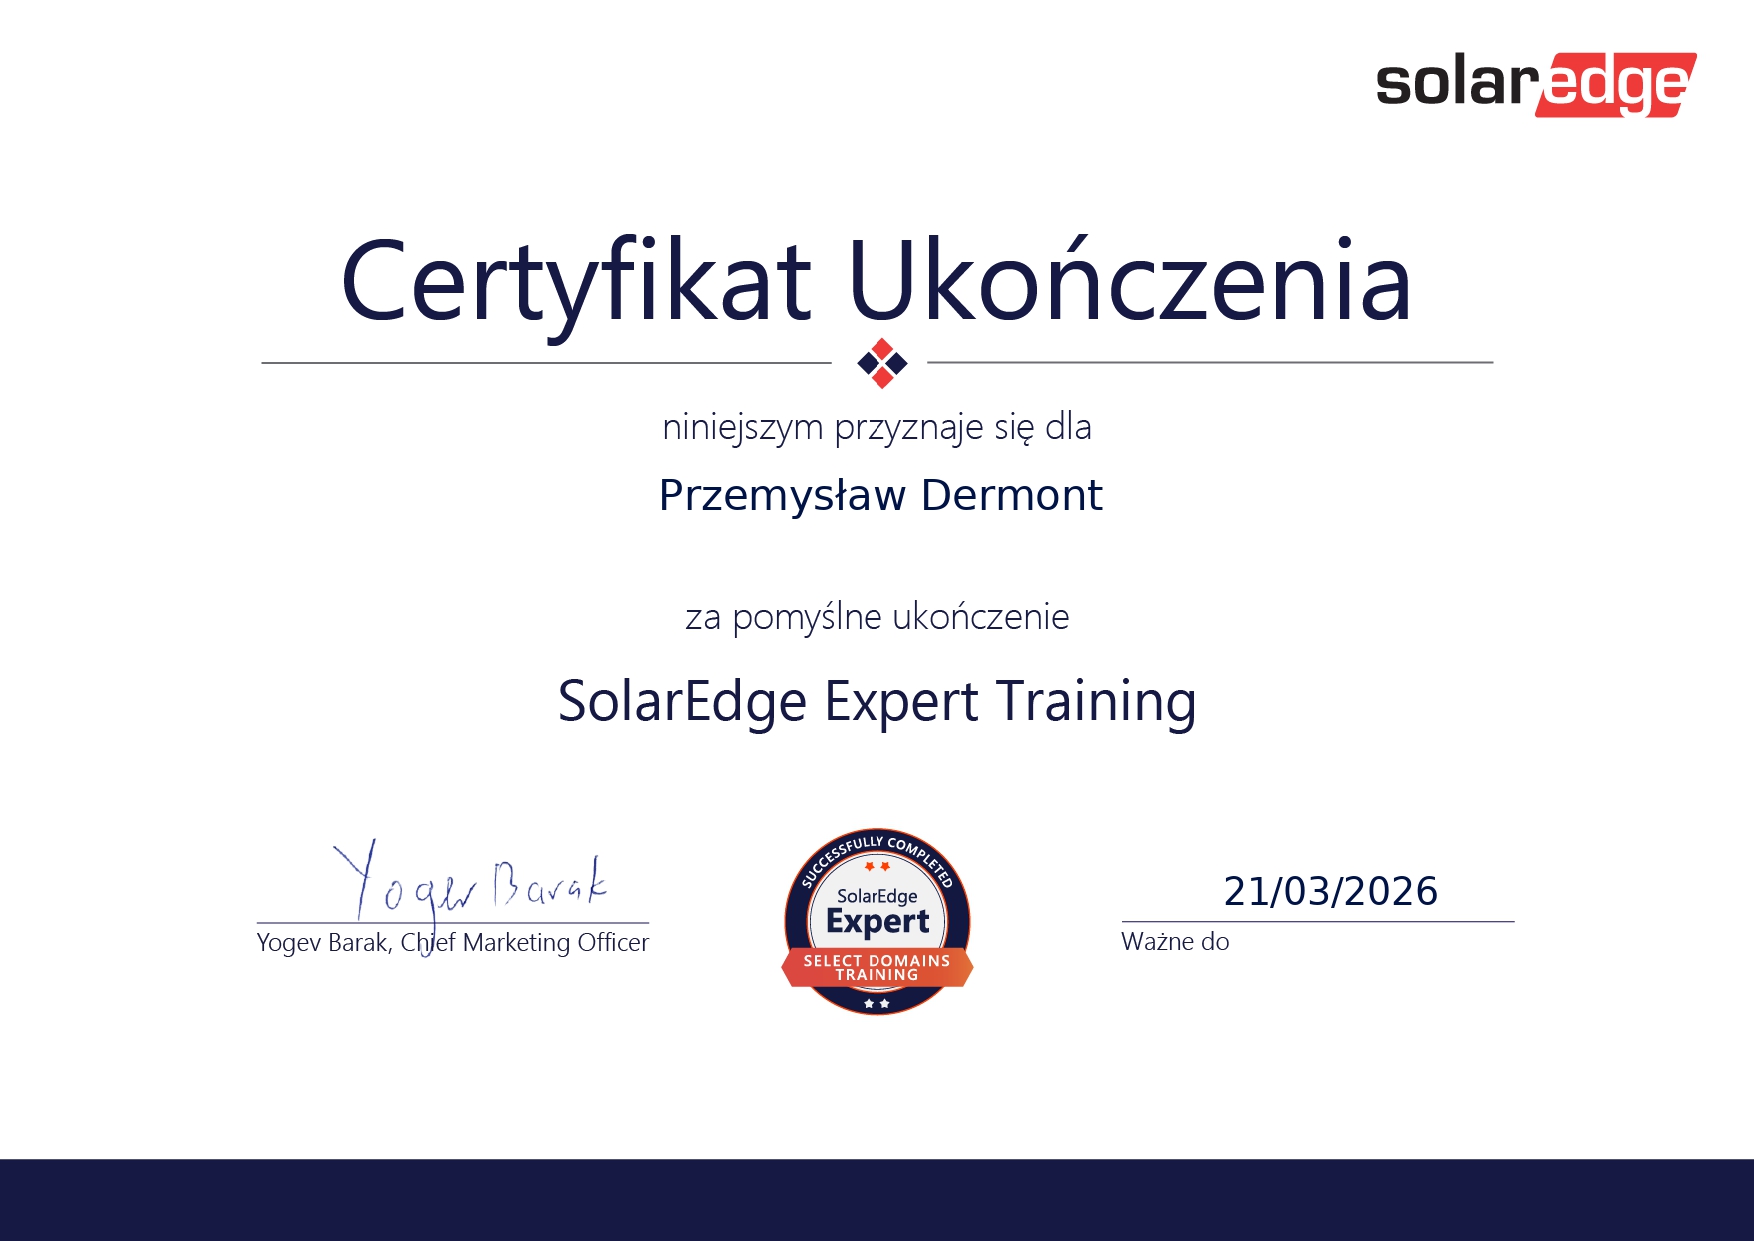 257_53_782473_1711053099_SolarEdge Expert Training Certificate - PL_page-0001